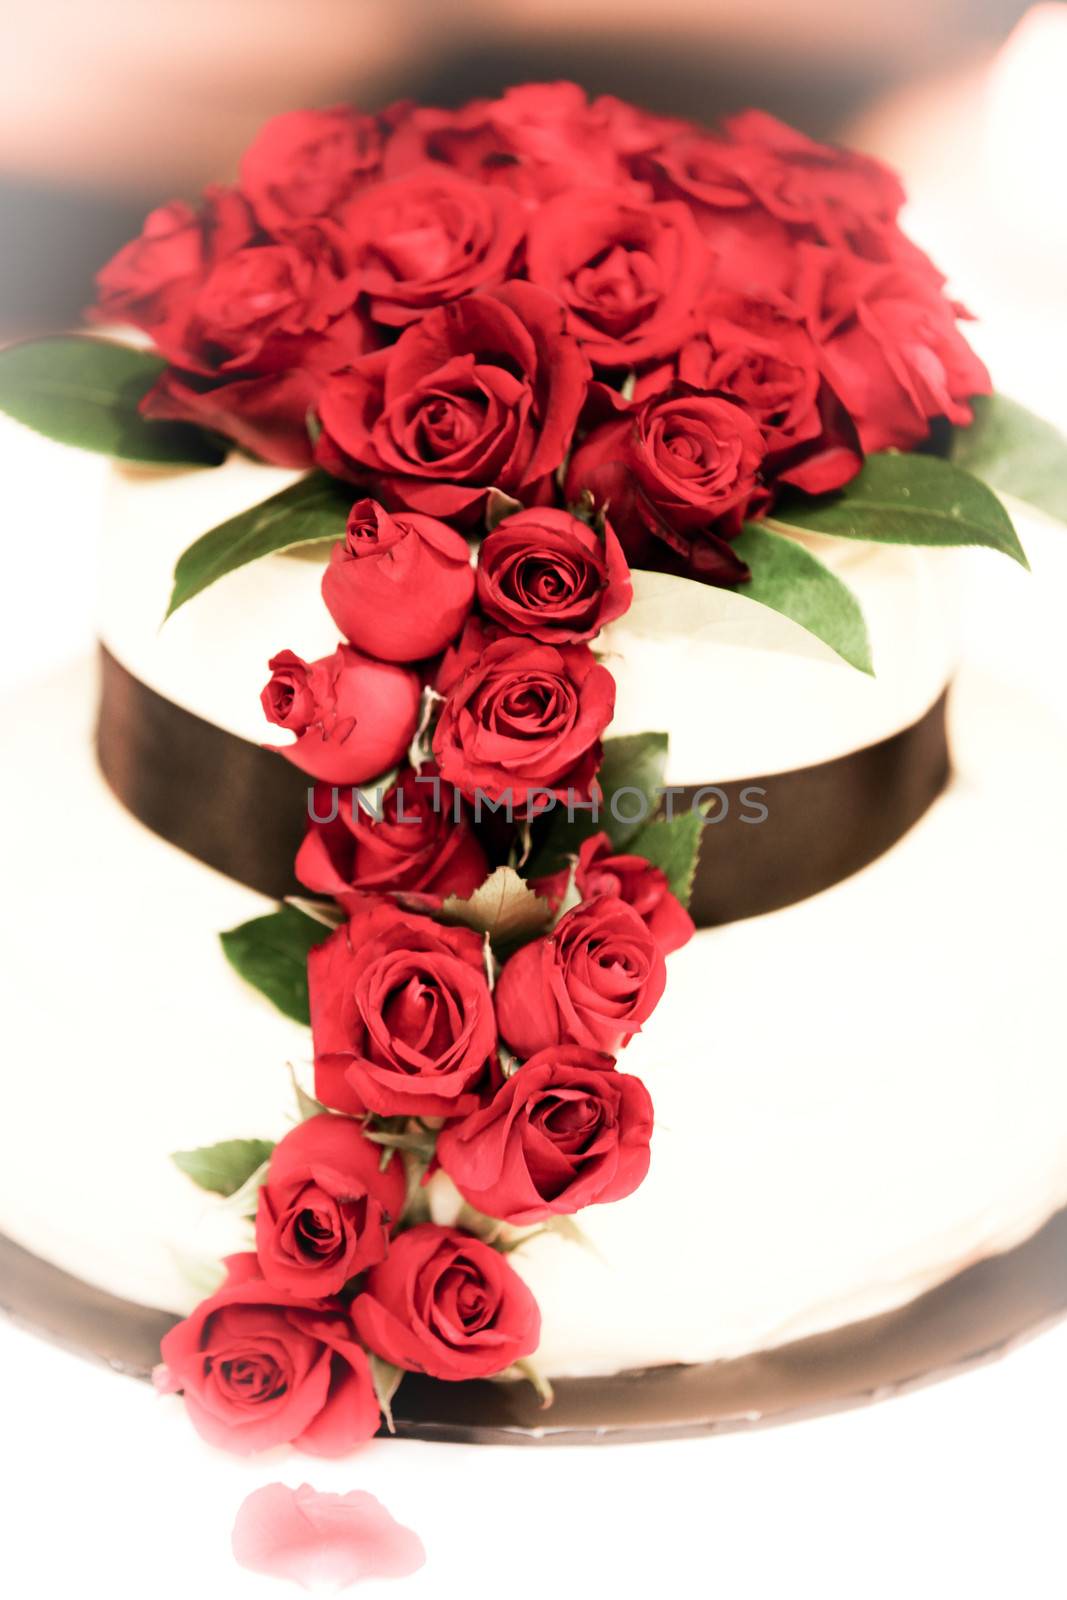 Beautifully decorated wedding cake with red roses